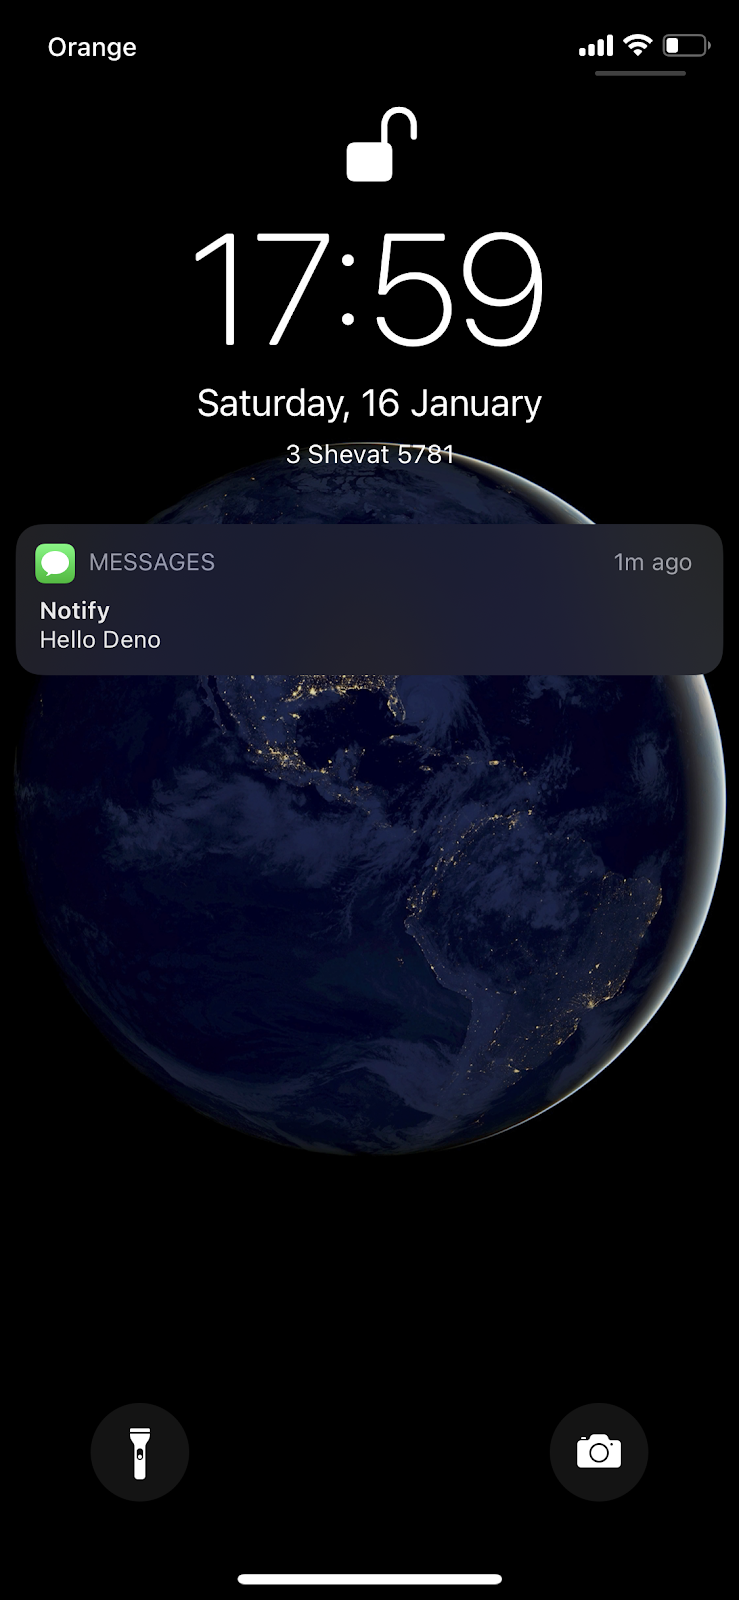 screenshot showing new message that says "hello deno" received on phone